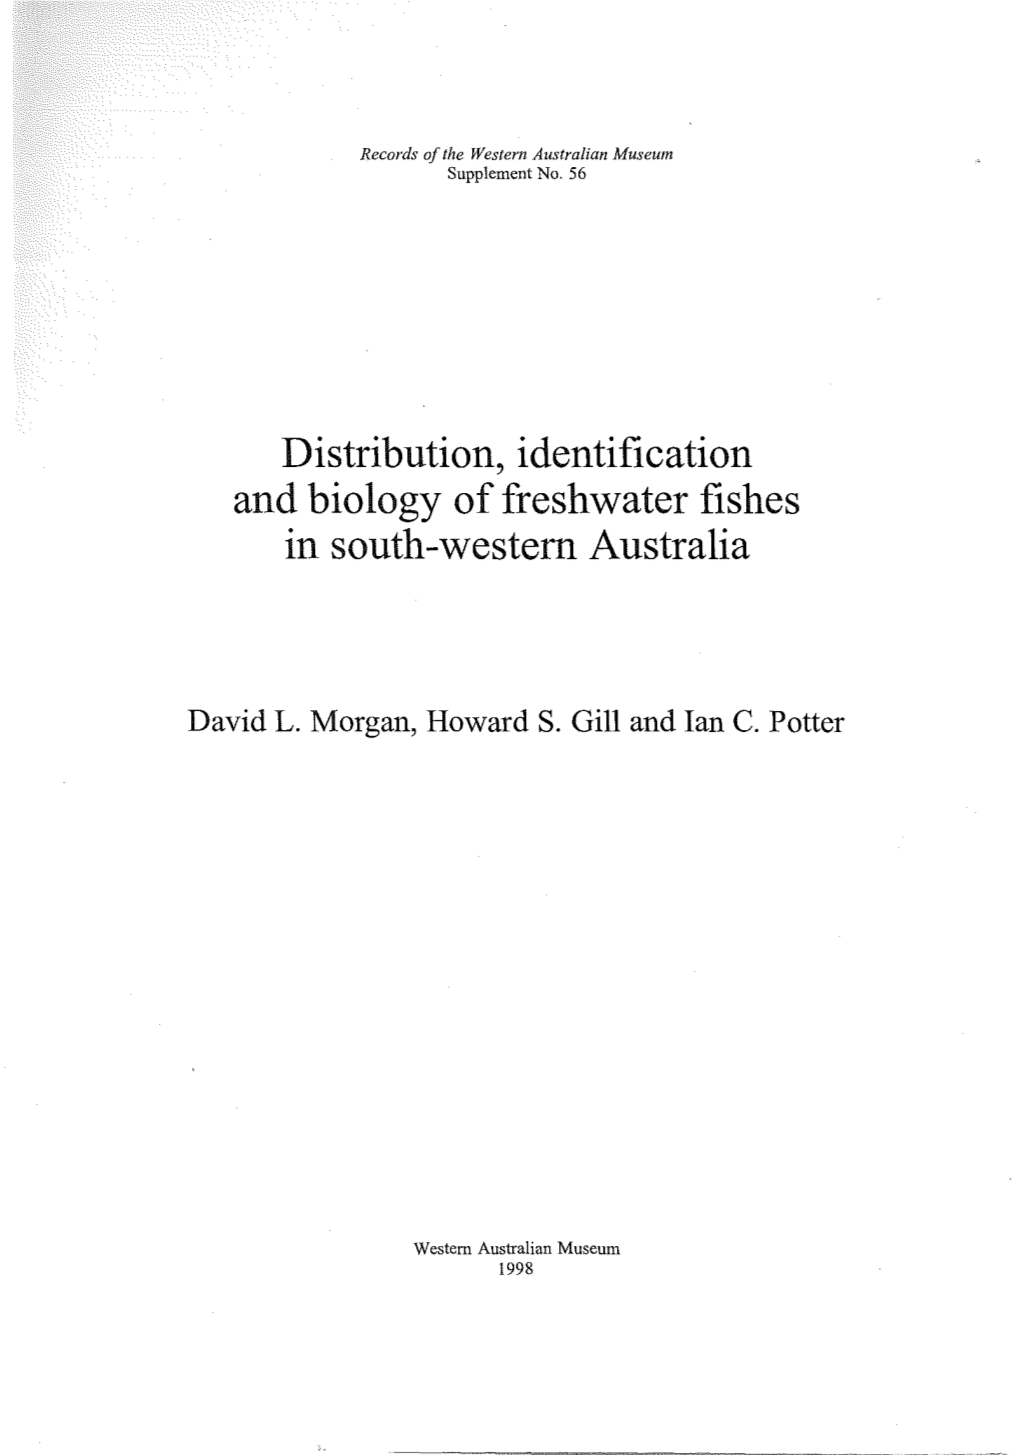 Distribution, Identification and Biology of Freshwater Fishes in South-Western Australia